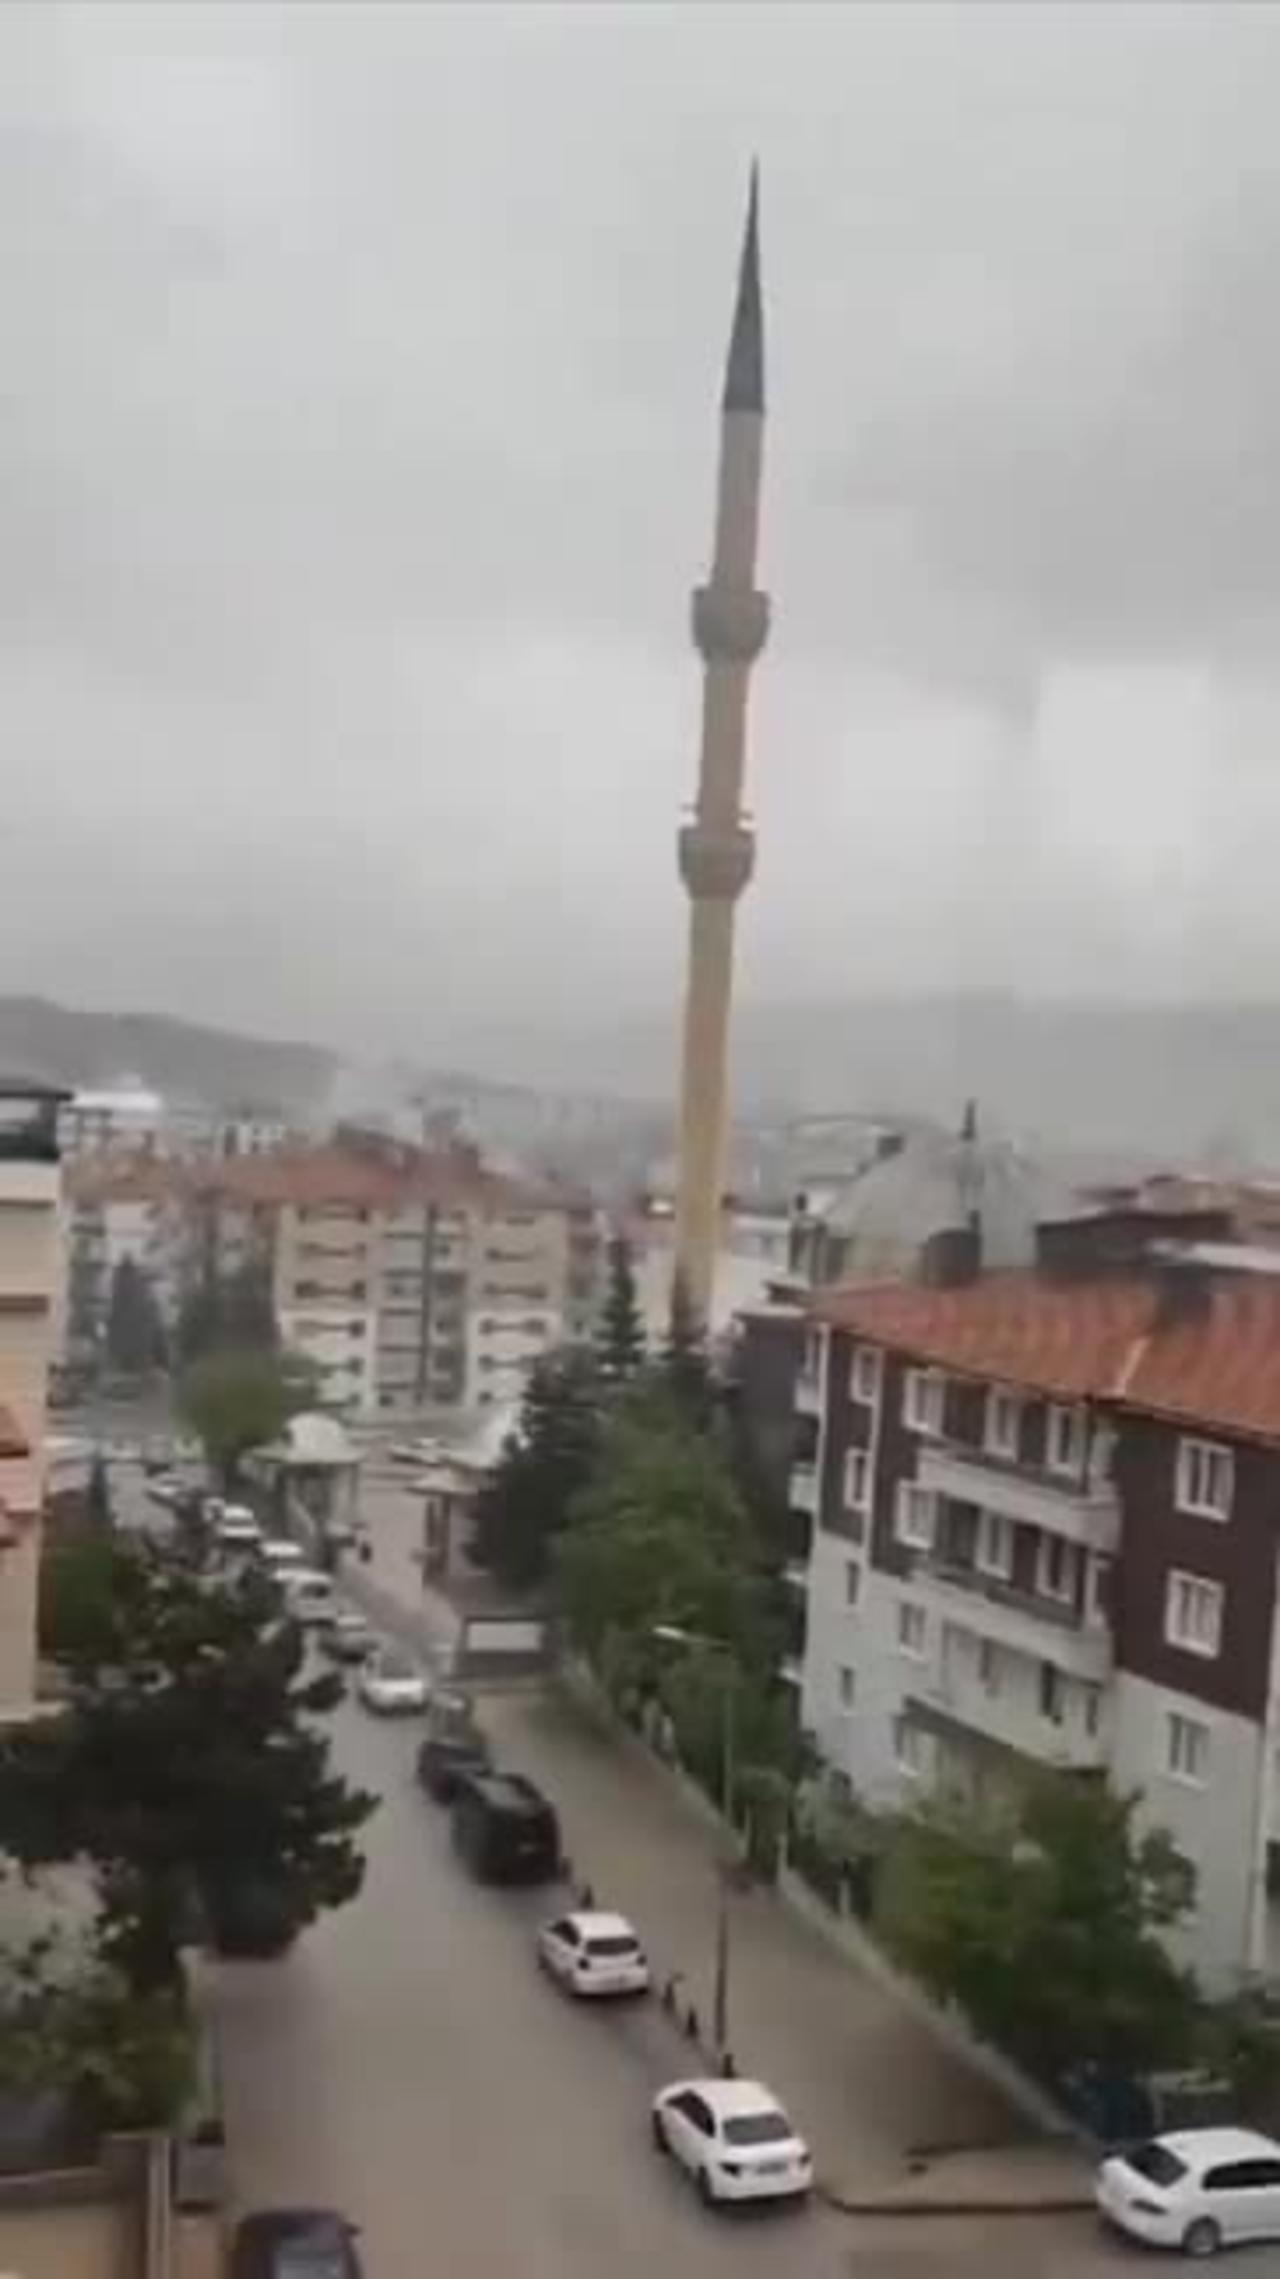 In Turkey, a strong storm, the wind demolished the minaret of a mosque in the